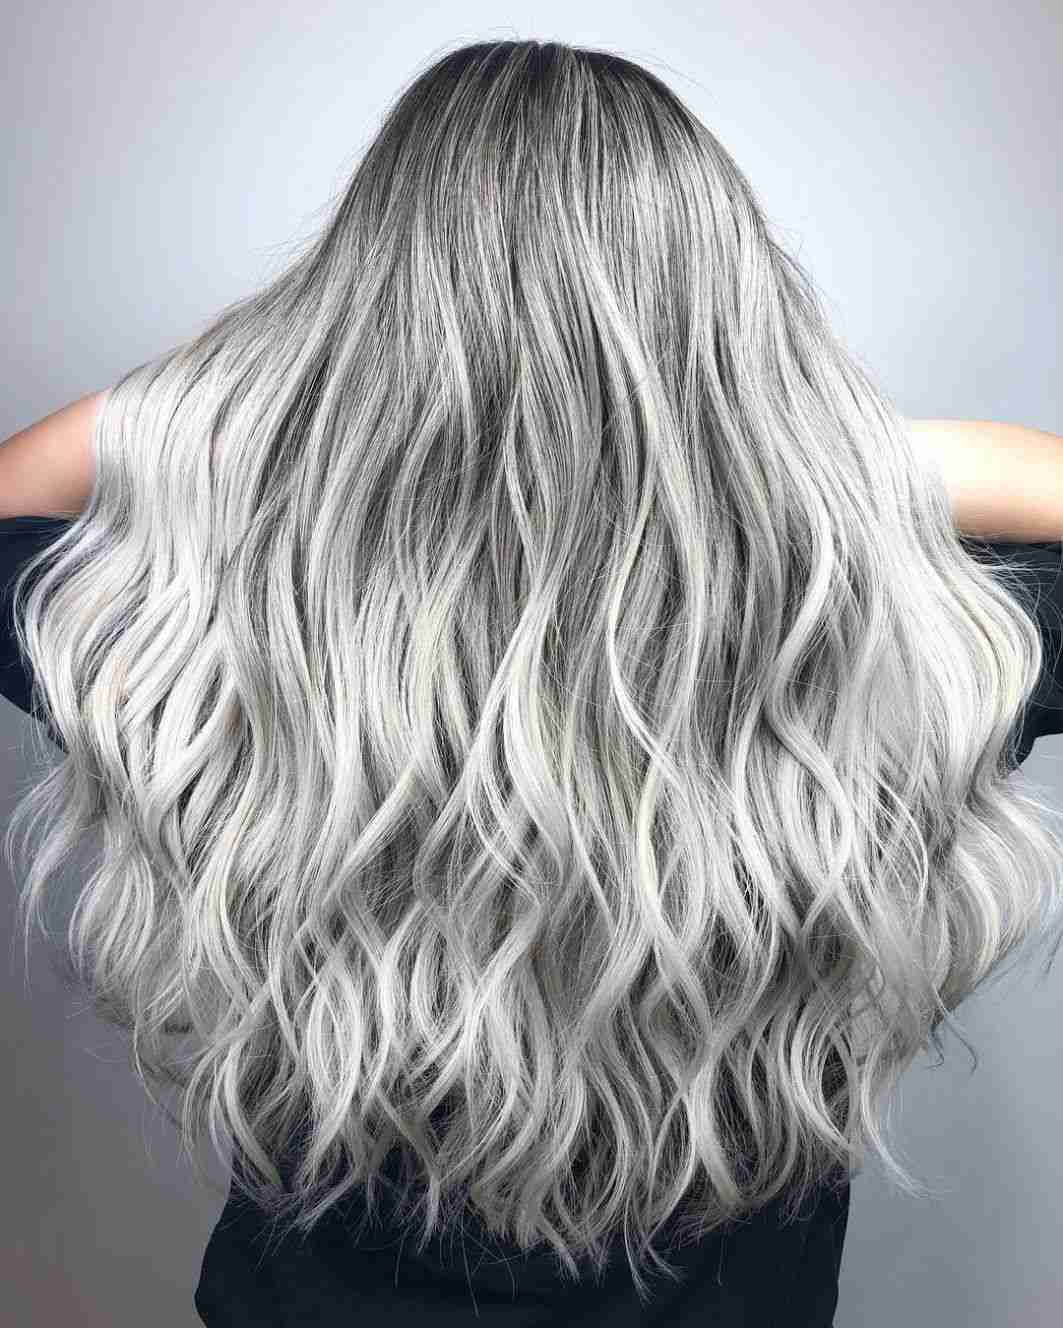 Brown hair gray colors Tights self-make silver Hair color Trend